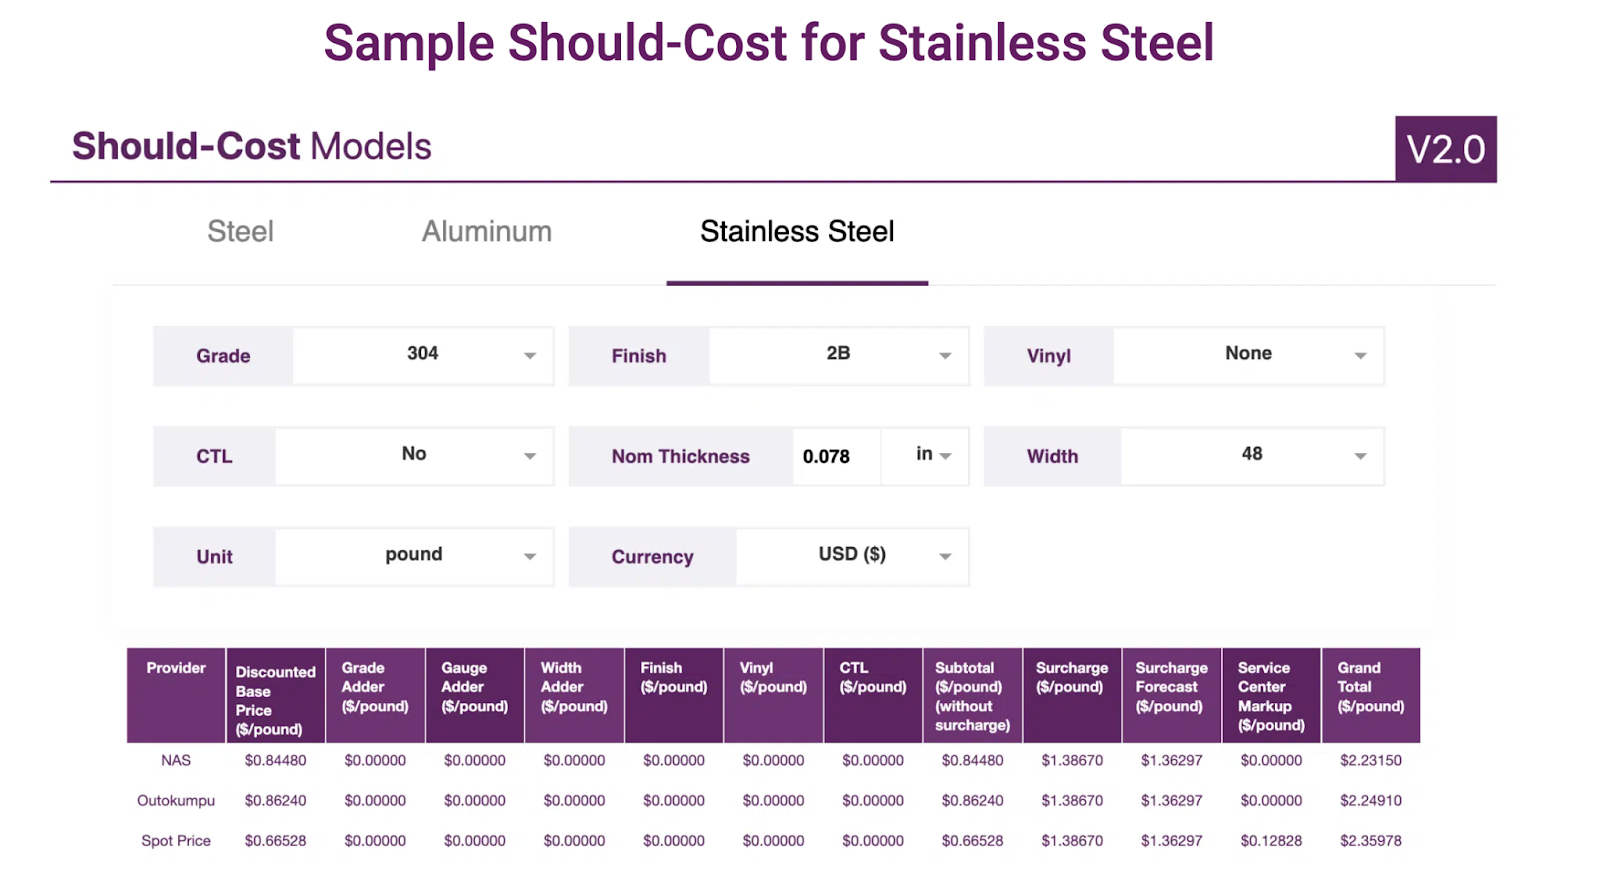 stainless should-cost models for nickel prices and stainless steel prices